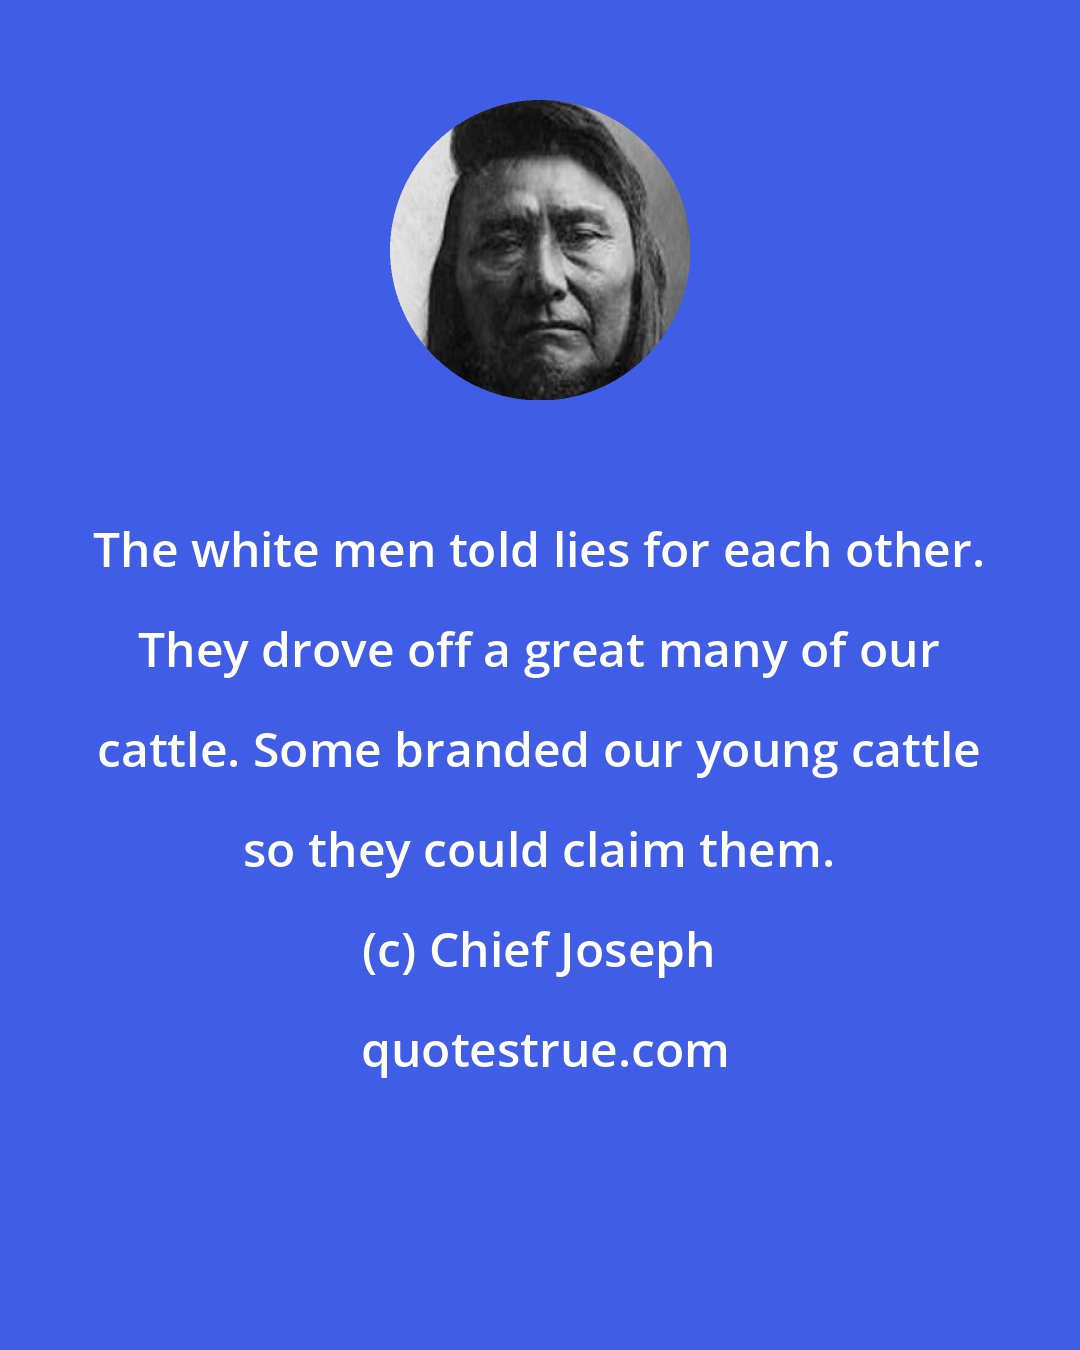 Chief Joseph: The white men told lies for each other. They drove off a great many of our cattle. Some branded our young cattle so they could claim them.